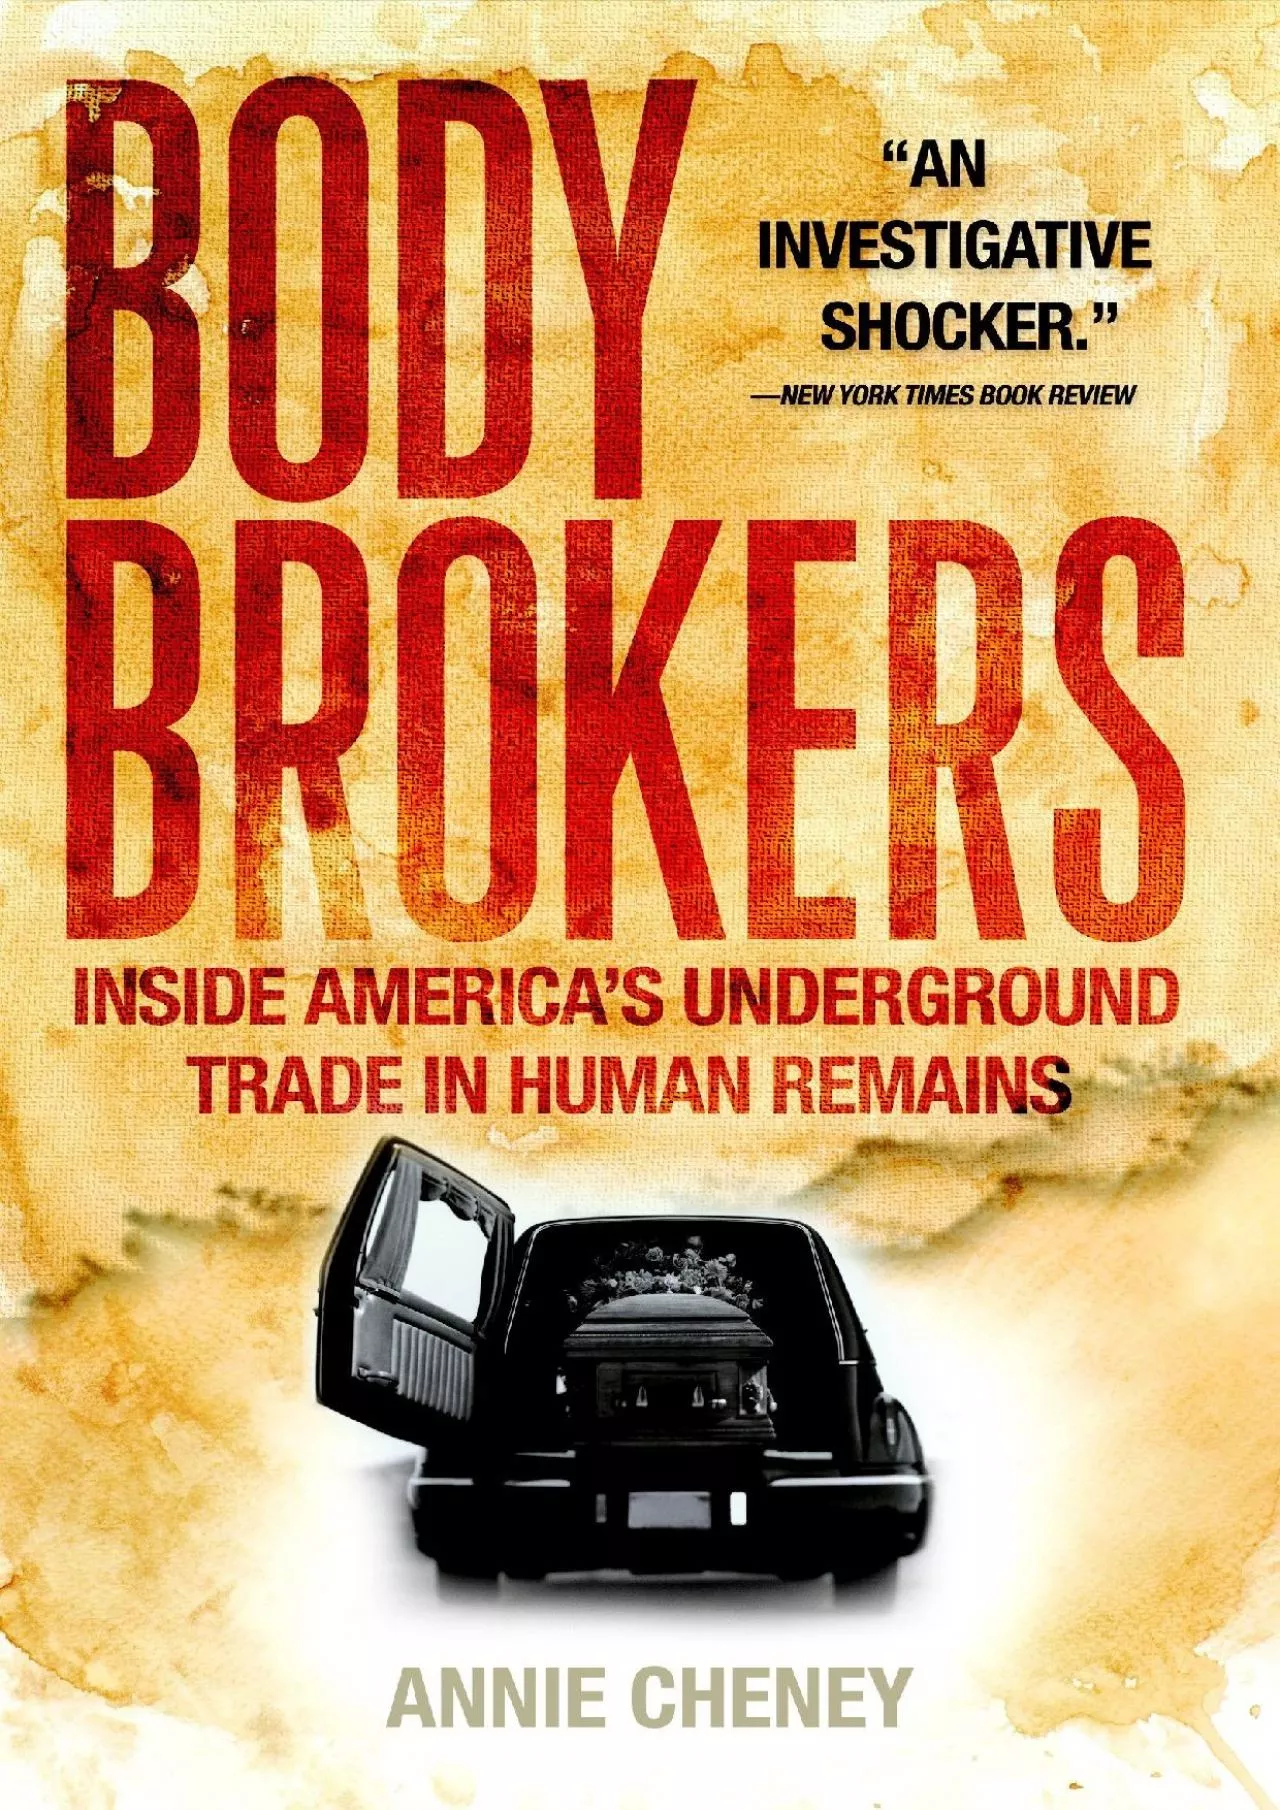 (DOWNLOAD)-Body Brokers: Inside America\'s Underground Trade in Human Remains